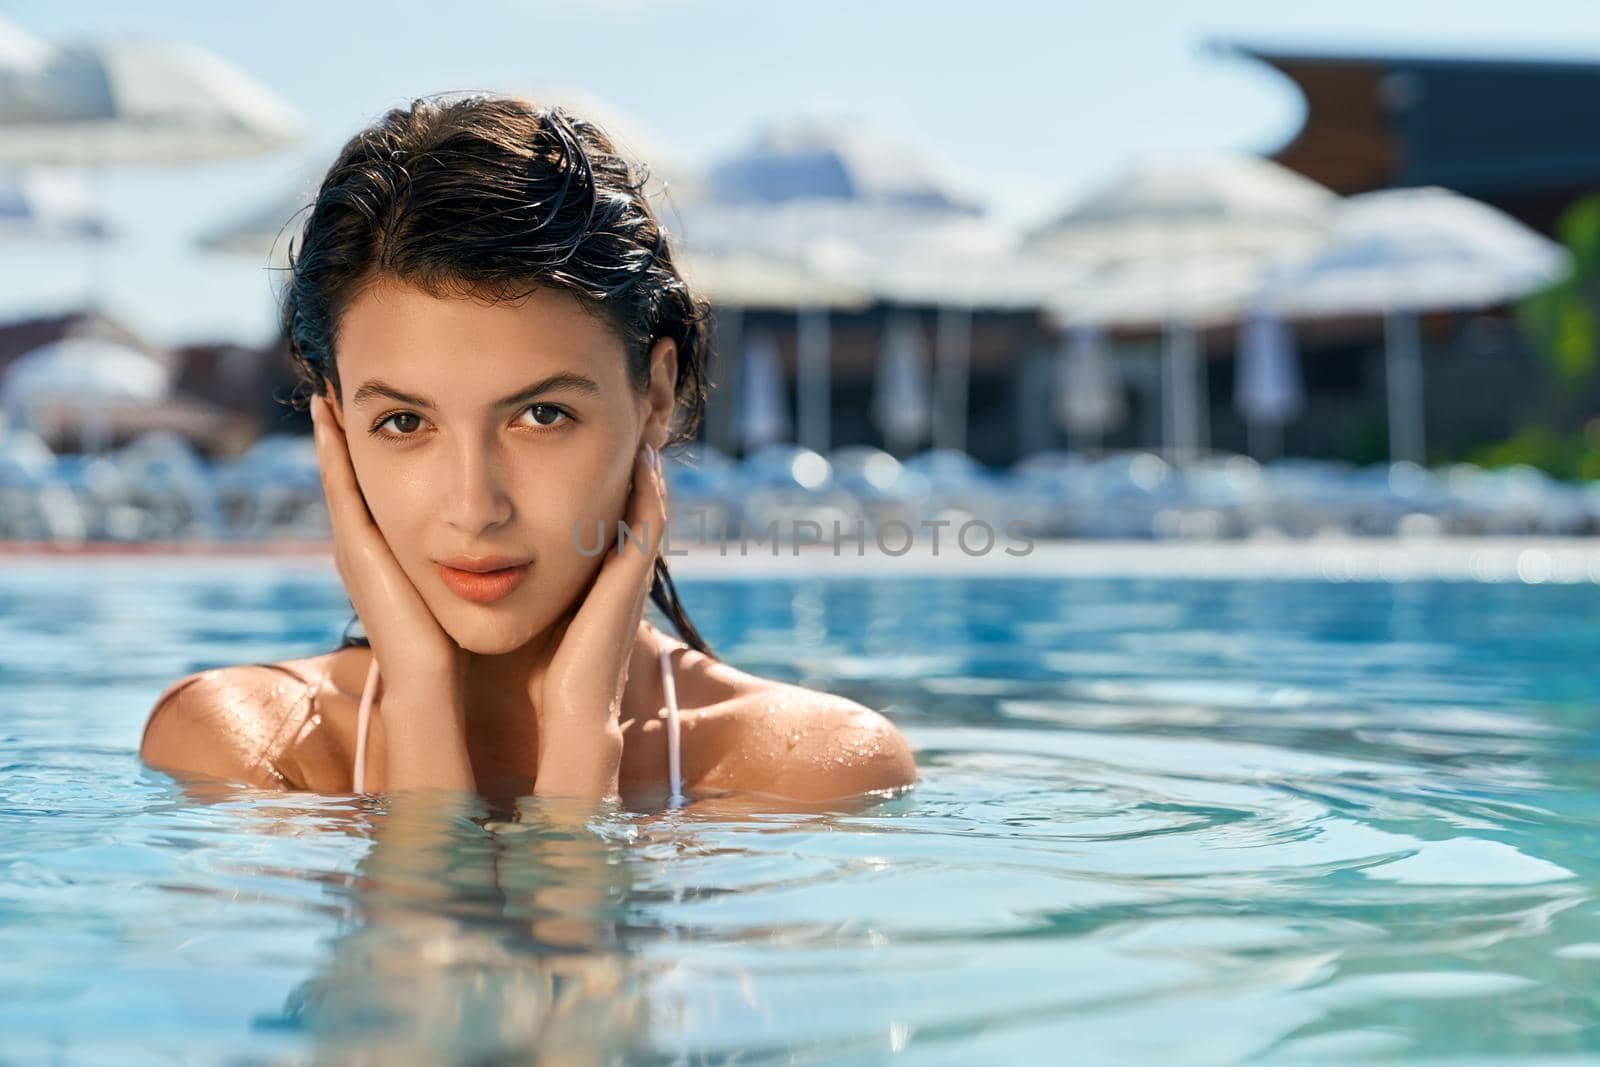 Front view of pretty young female with long hair standing in water. Brunette girl wearing white swimsuit swimming in pool, touching hair, looking at camera. Concept of youth.